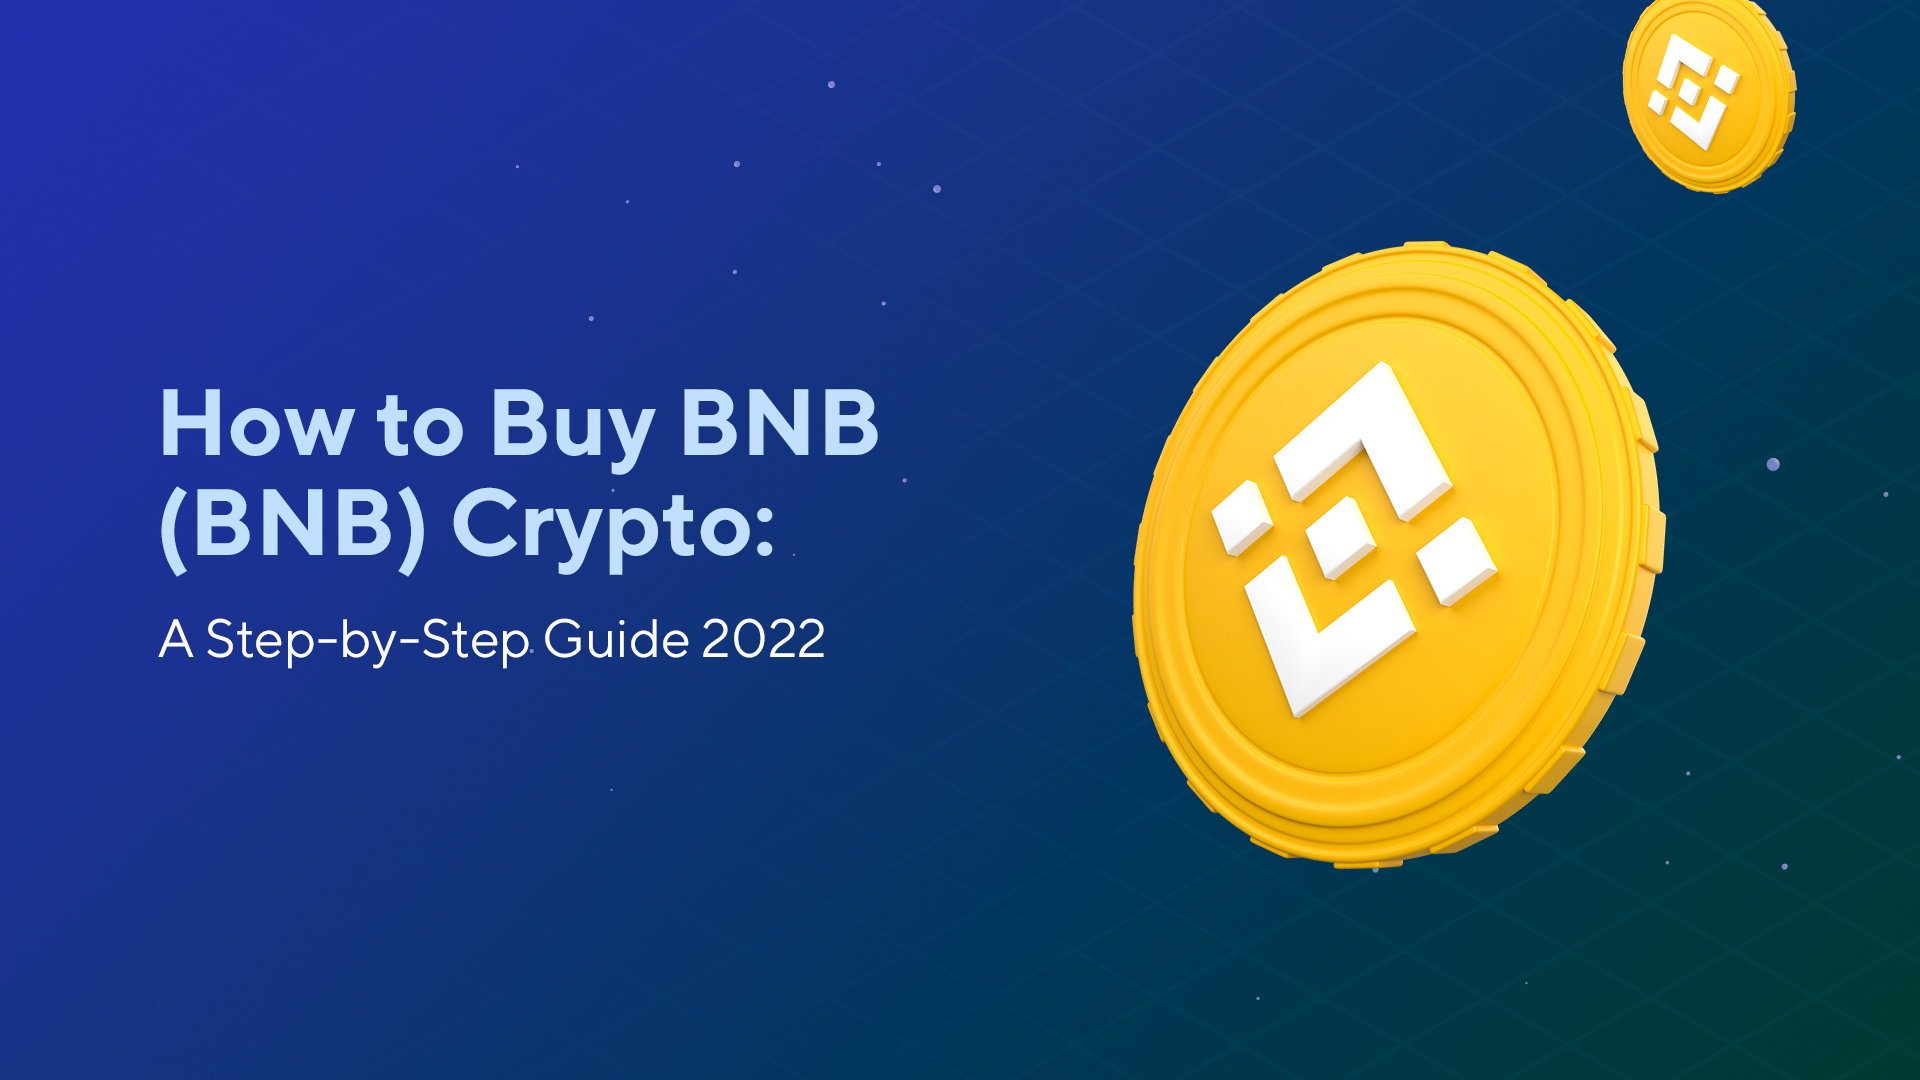 How to Buy BNB (BNB) Crypto: A Step-by-Step Guide 2022